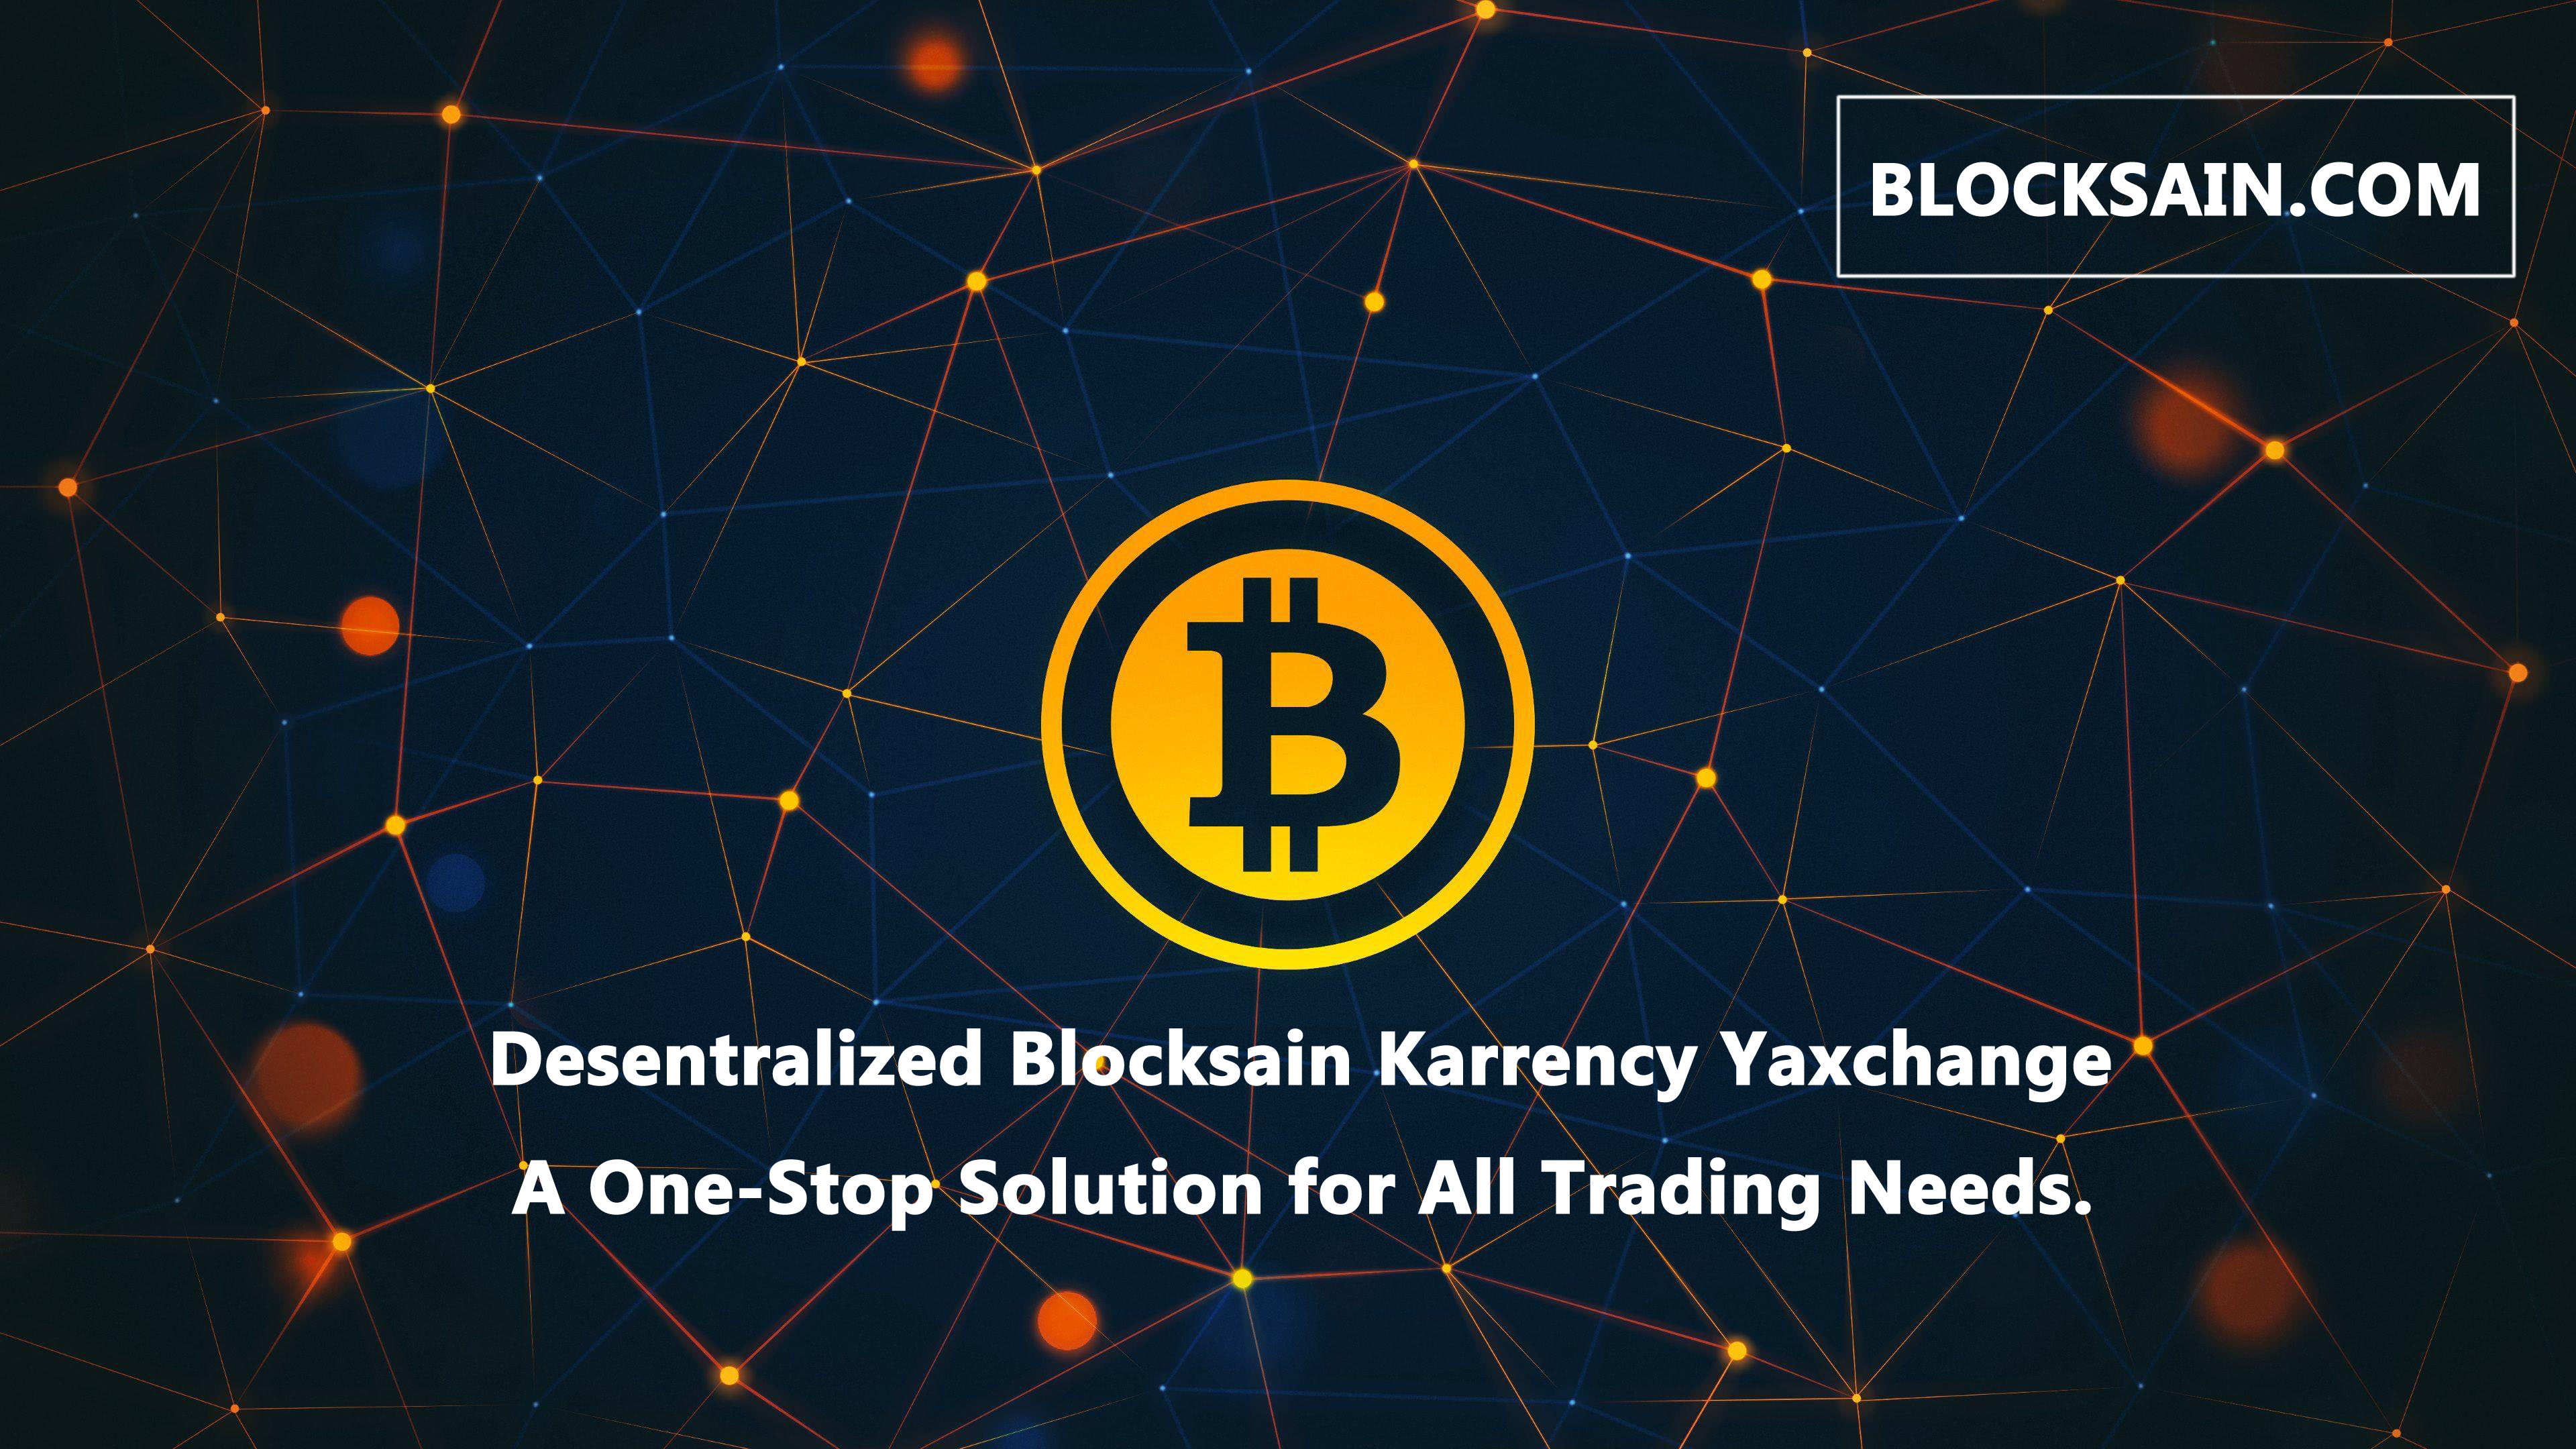 a One-Stop Solution for All Trading Needs blockchain.jpg